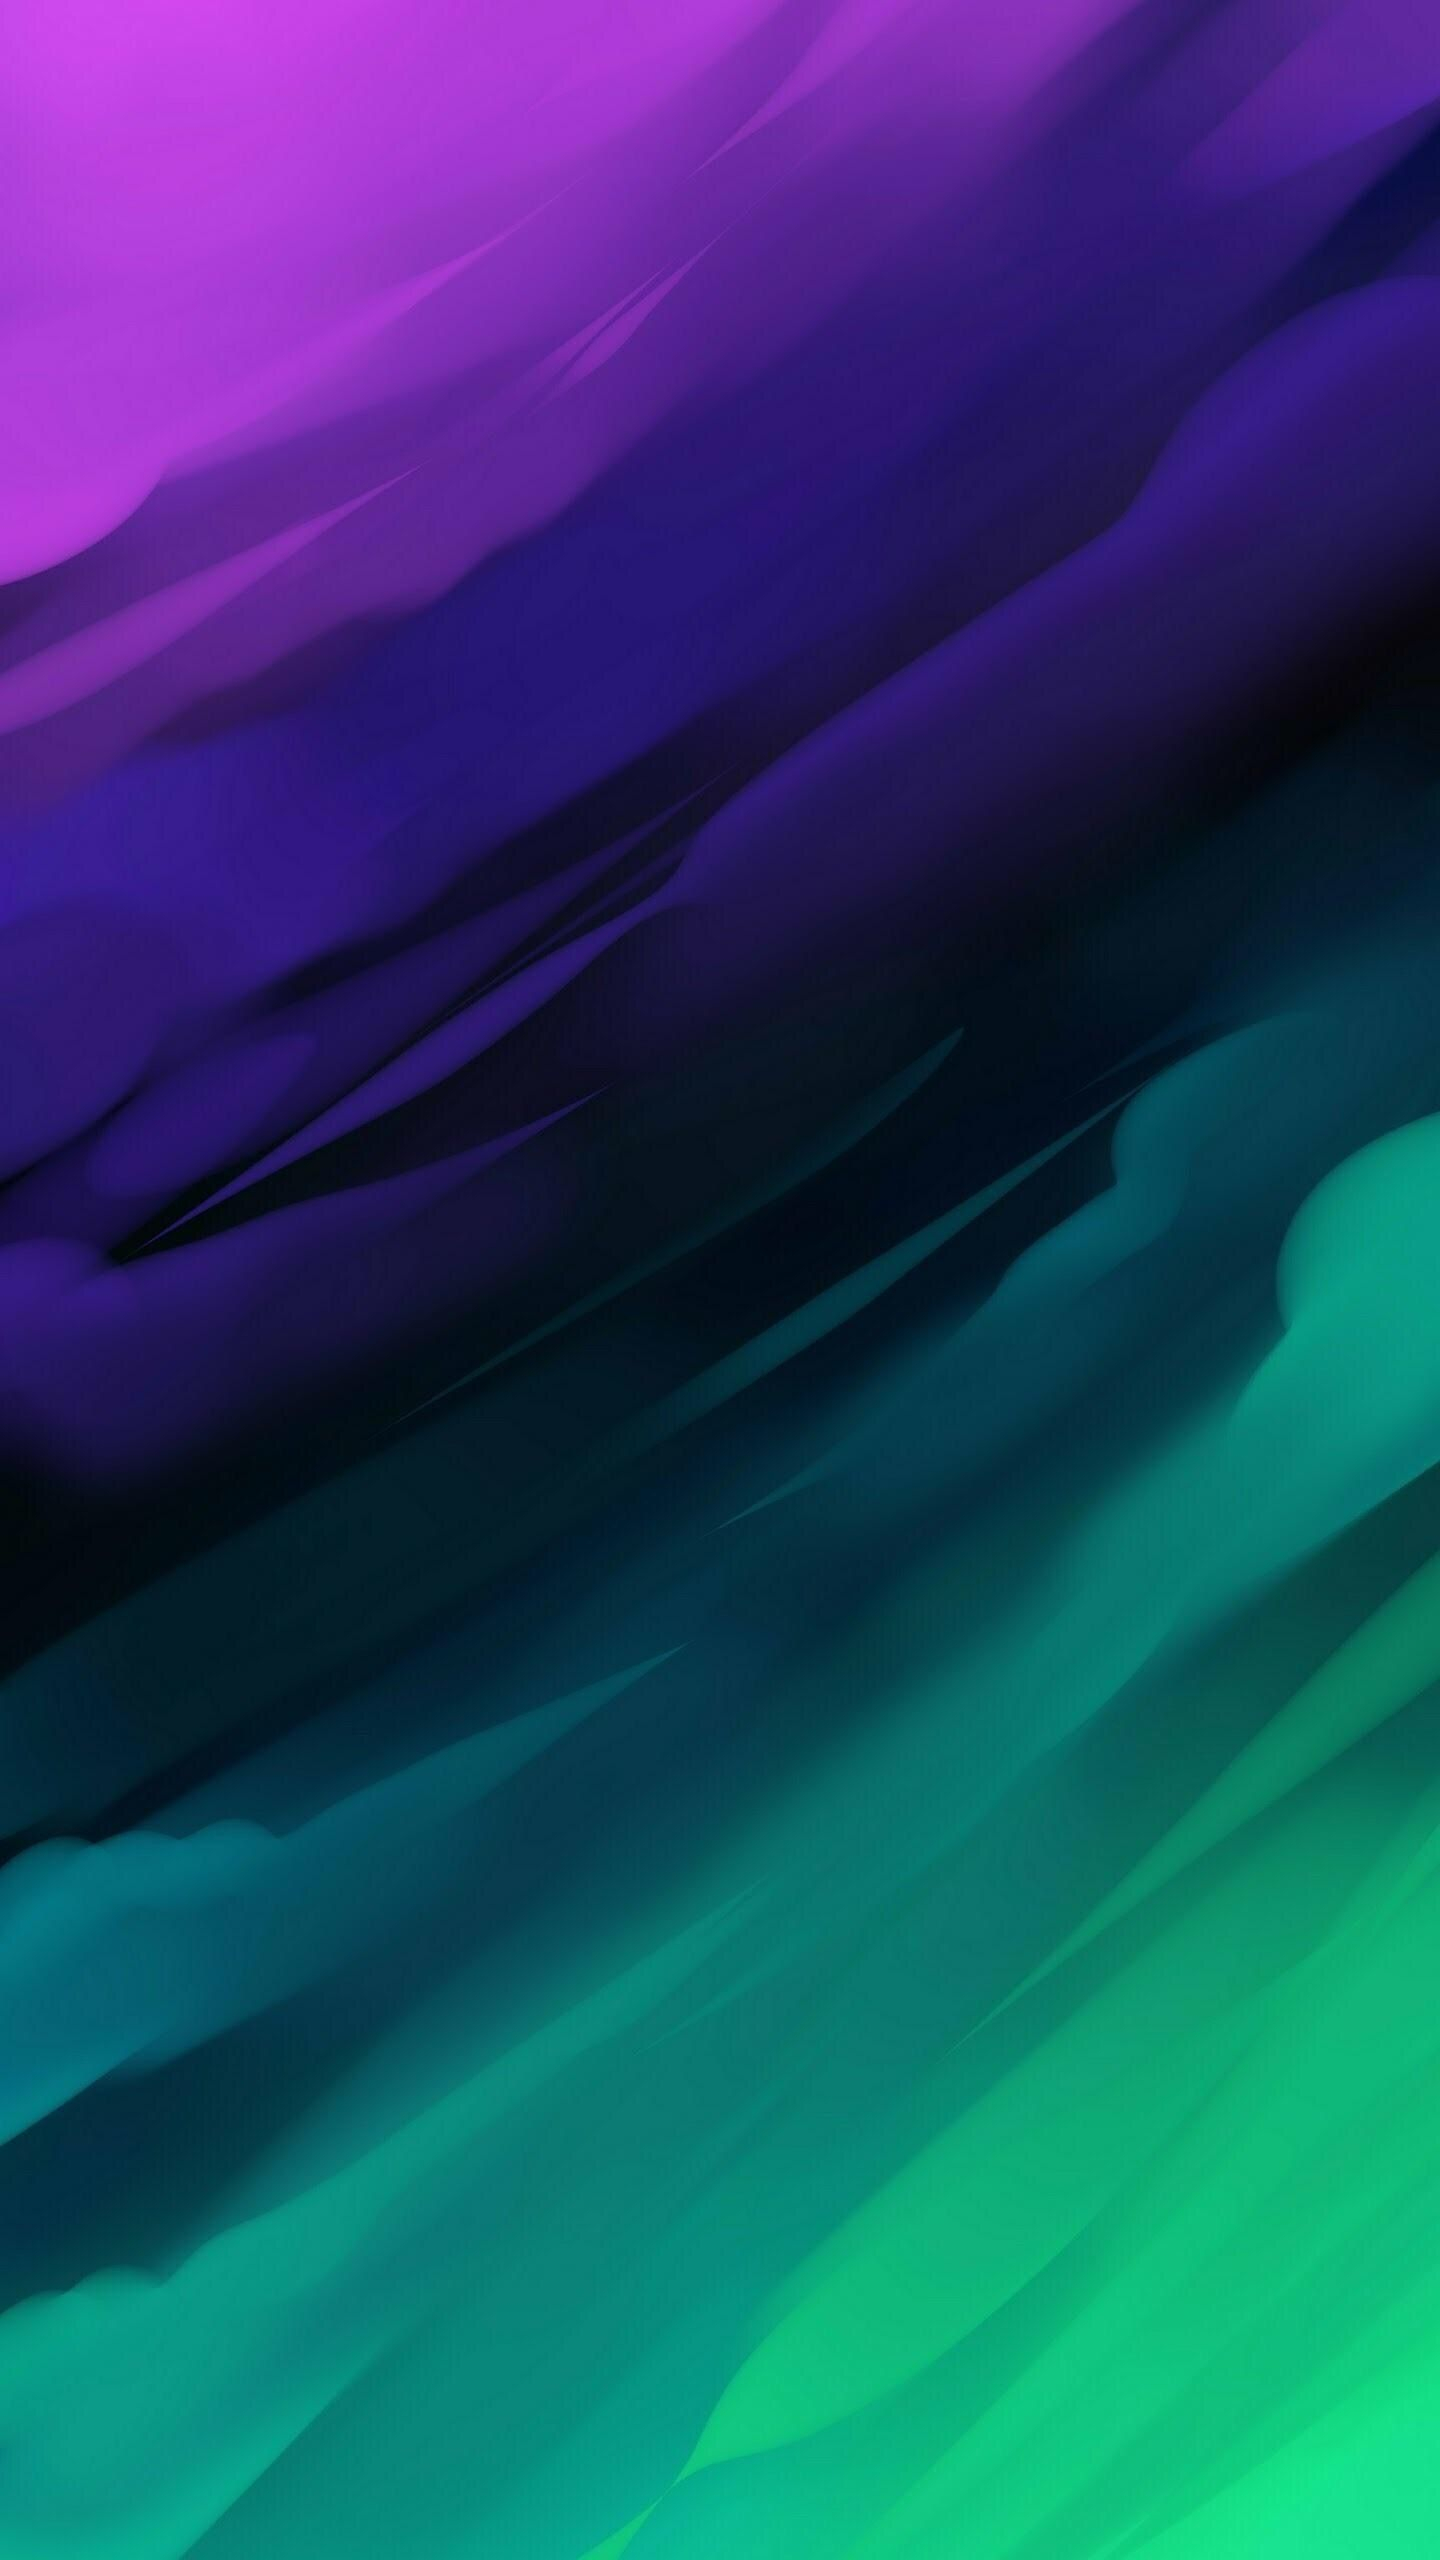 1440x2560 Turquoise and Mauve Wallpapers